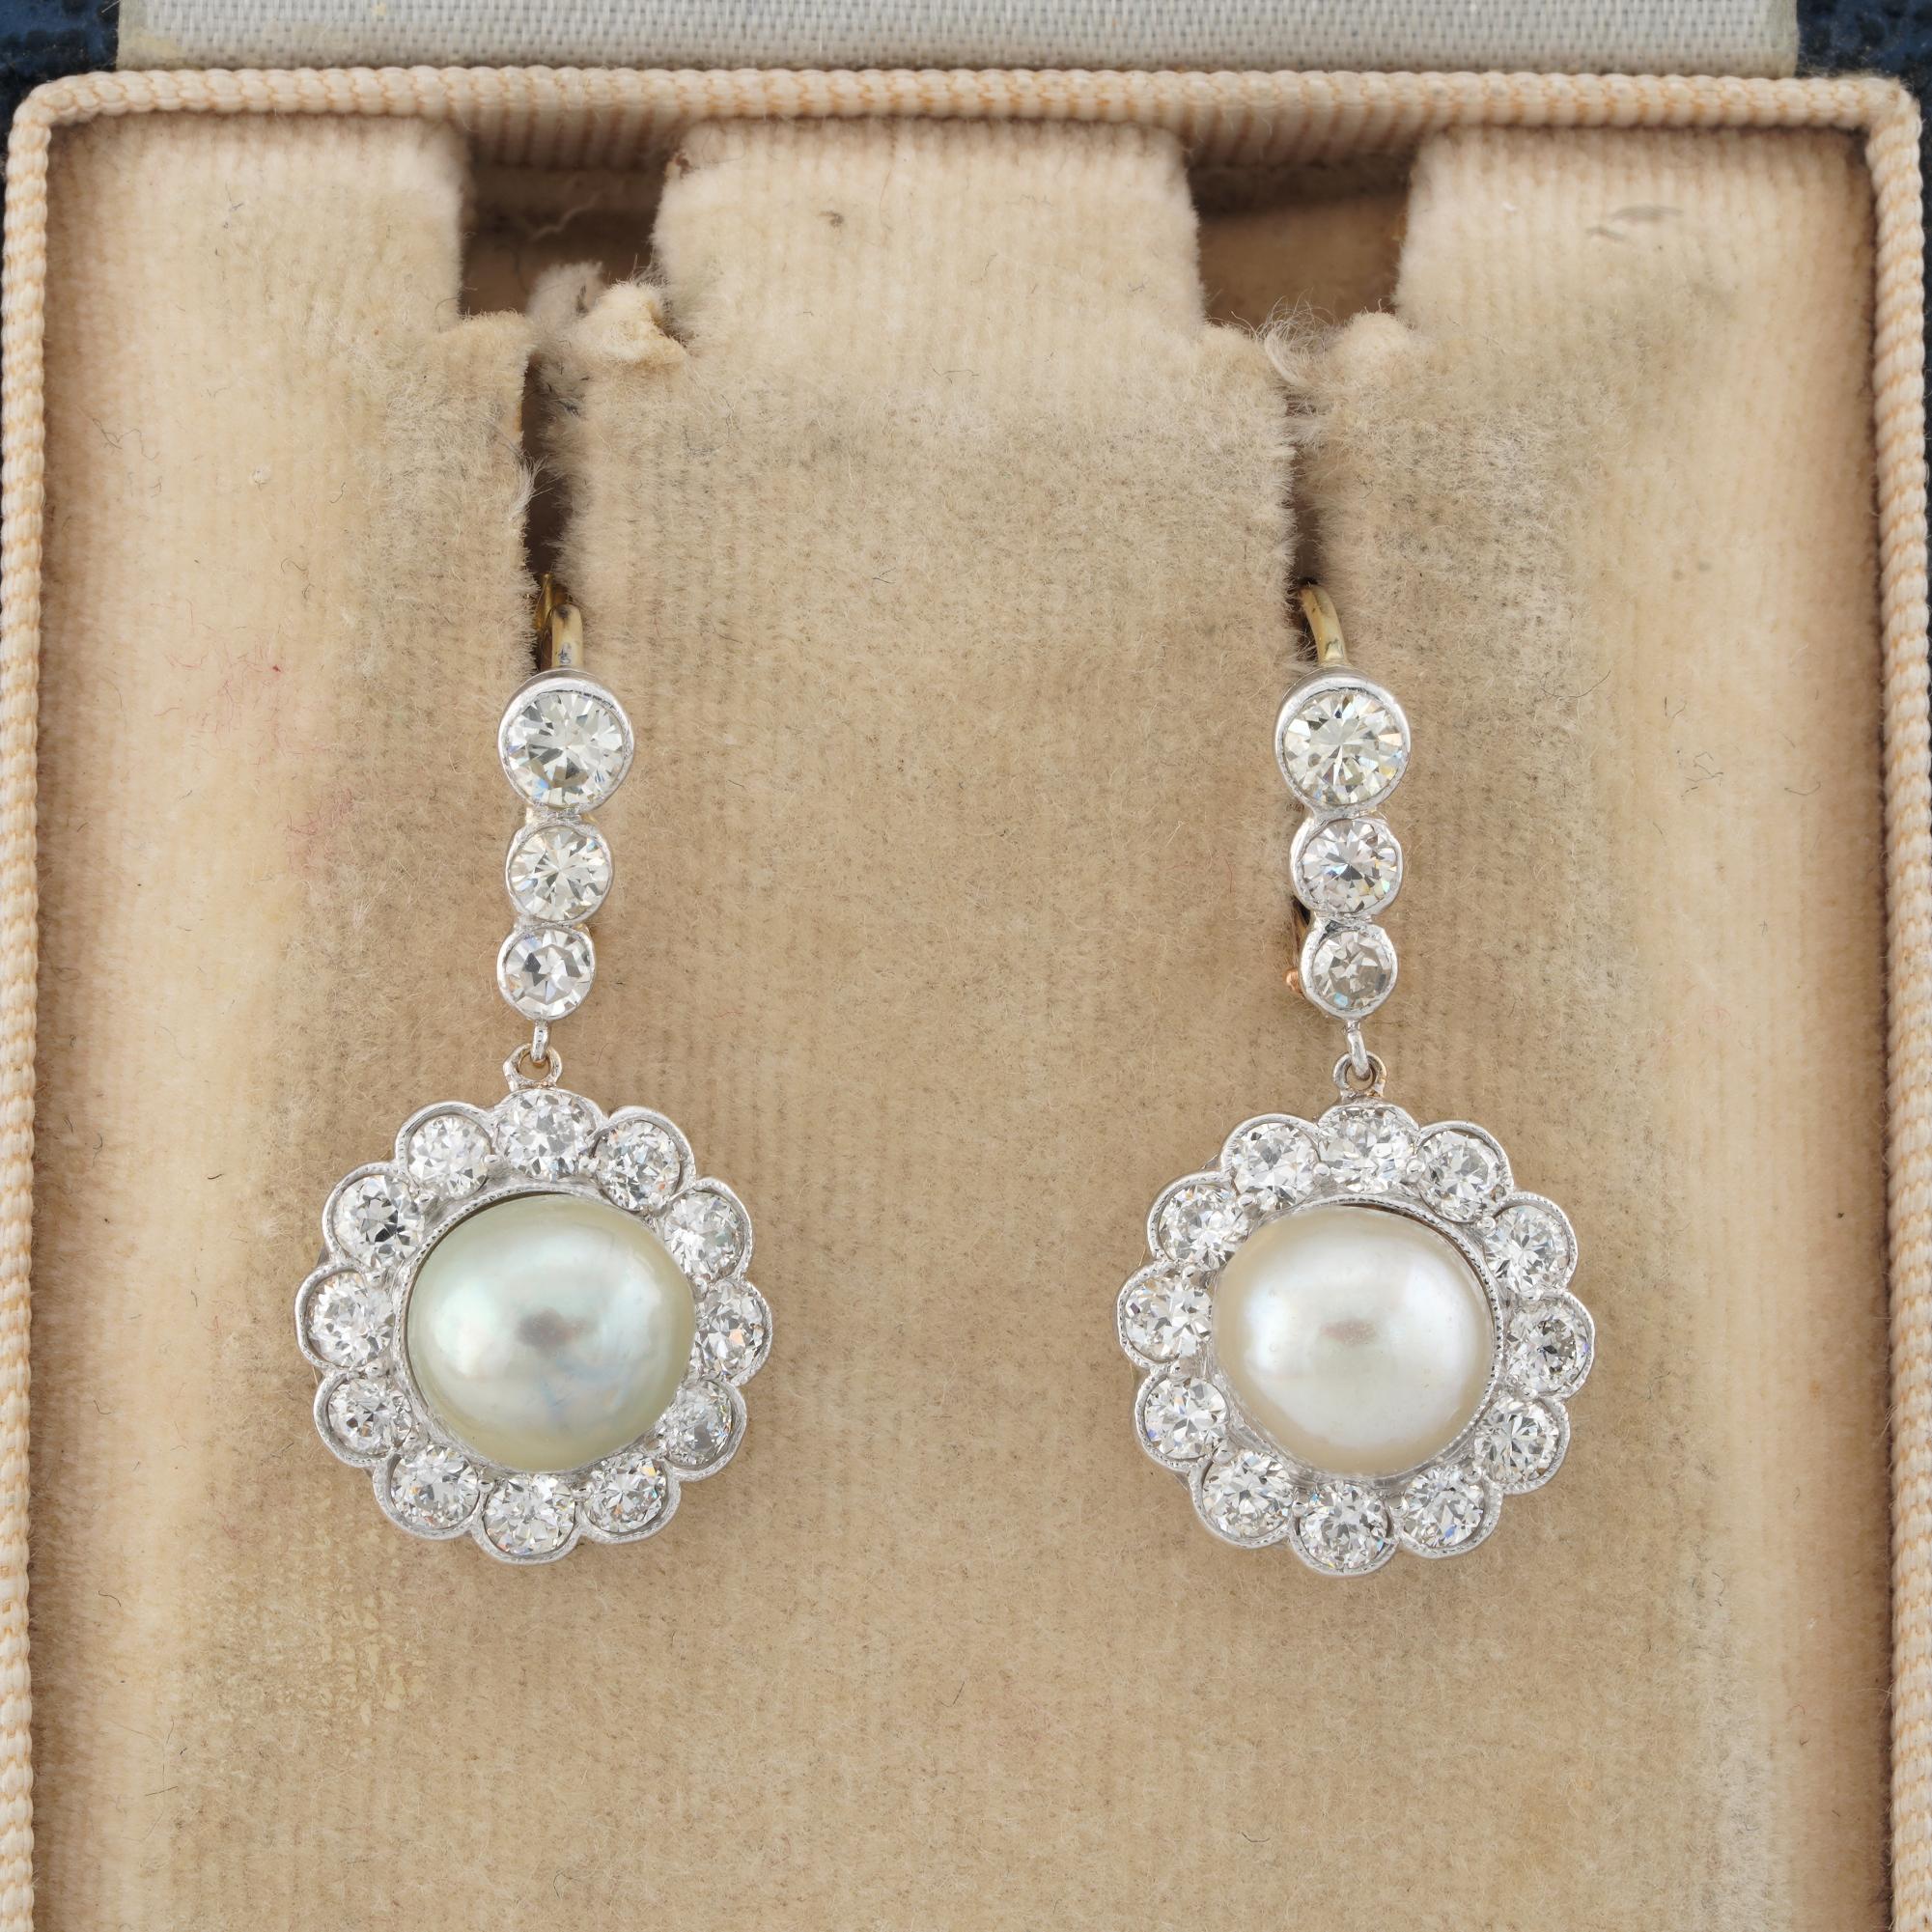 The Classy Must!
These gorgeous and timeless antique earrings are Edwardian period
They have been hand crafted of solid 18 KT and Platinum – designed in the most elegant cluster design as classy statement of the time
Fashioned with a main round drop